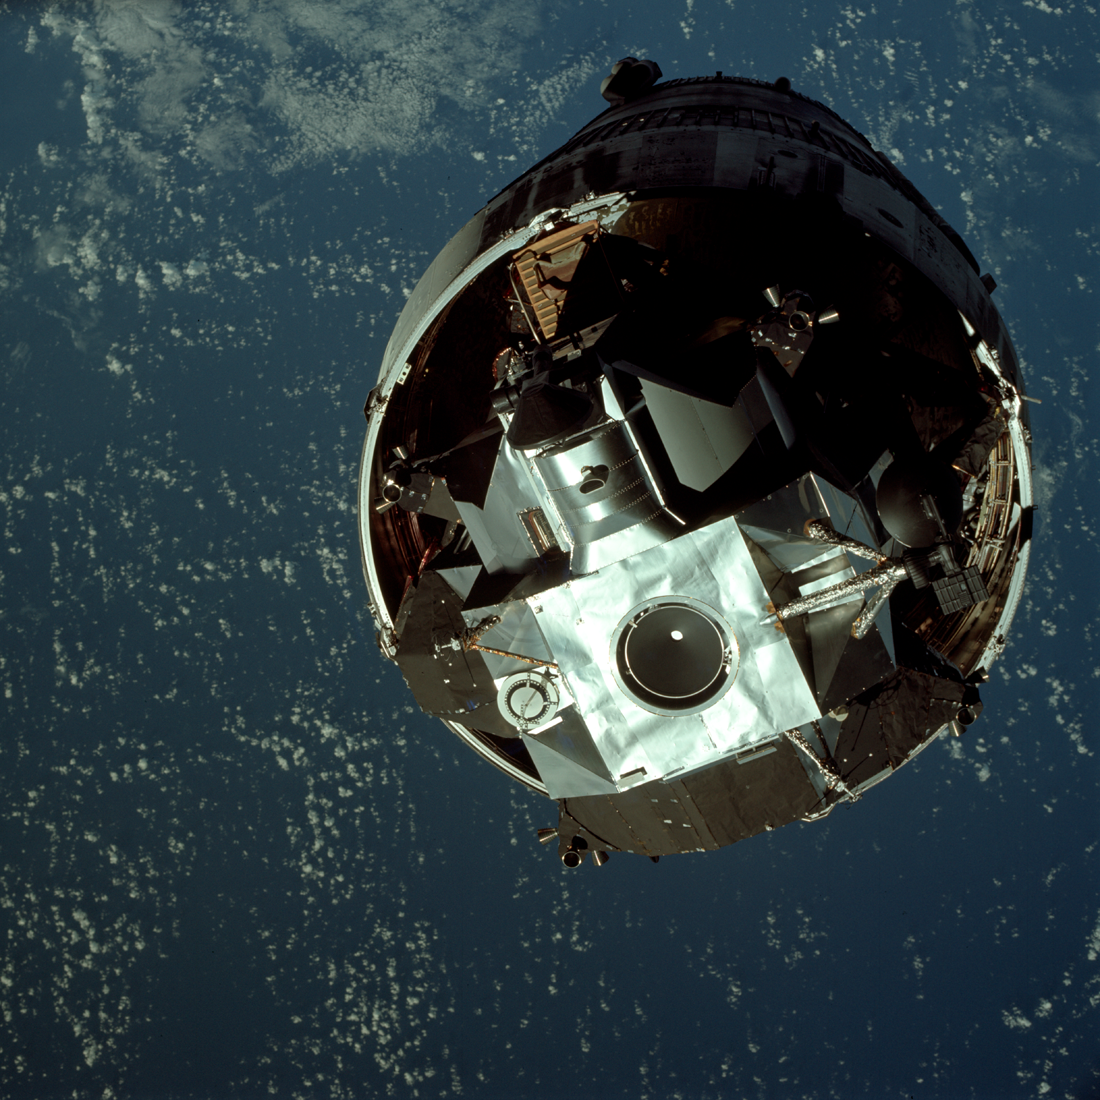 The LM Spider on top of its S-IVB third stage before docking and extraction.